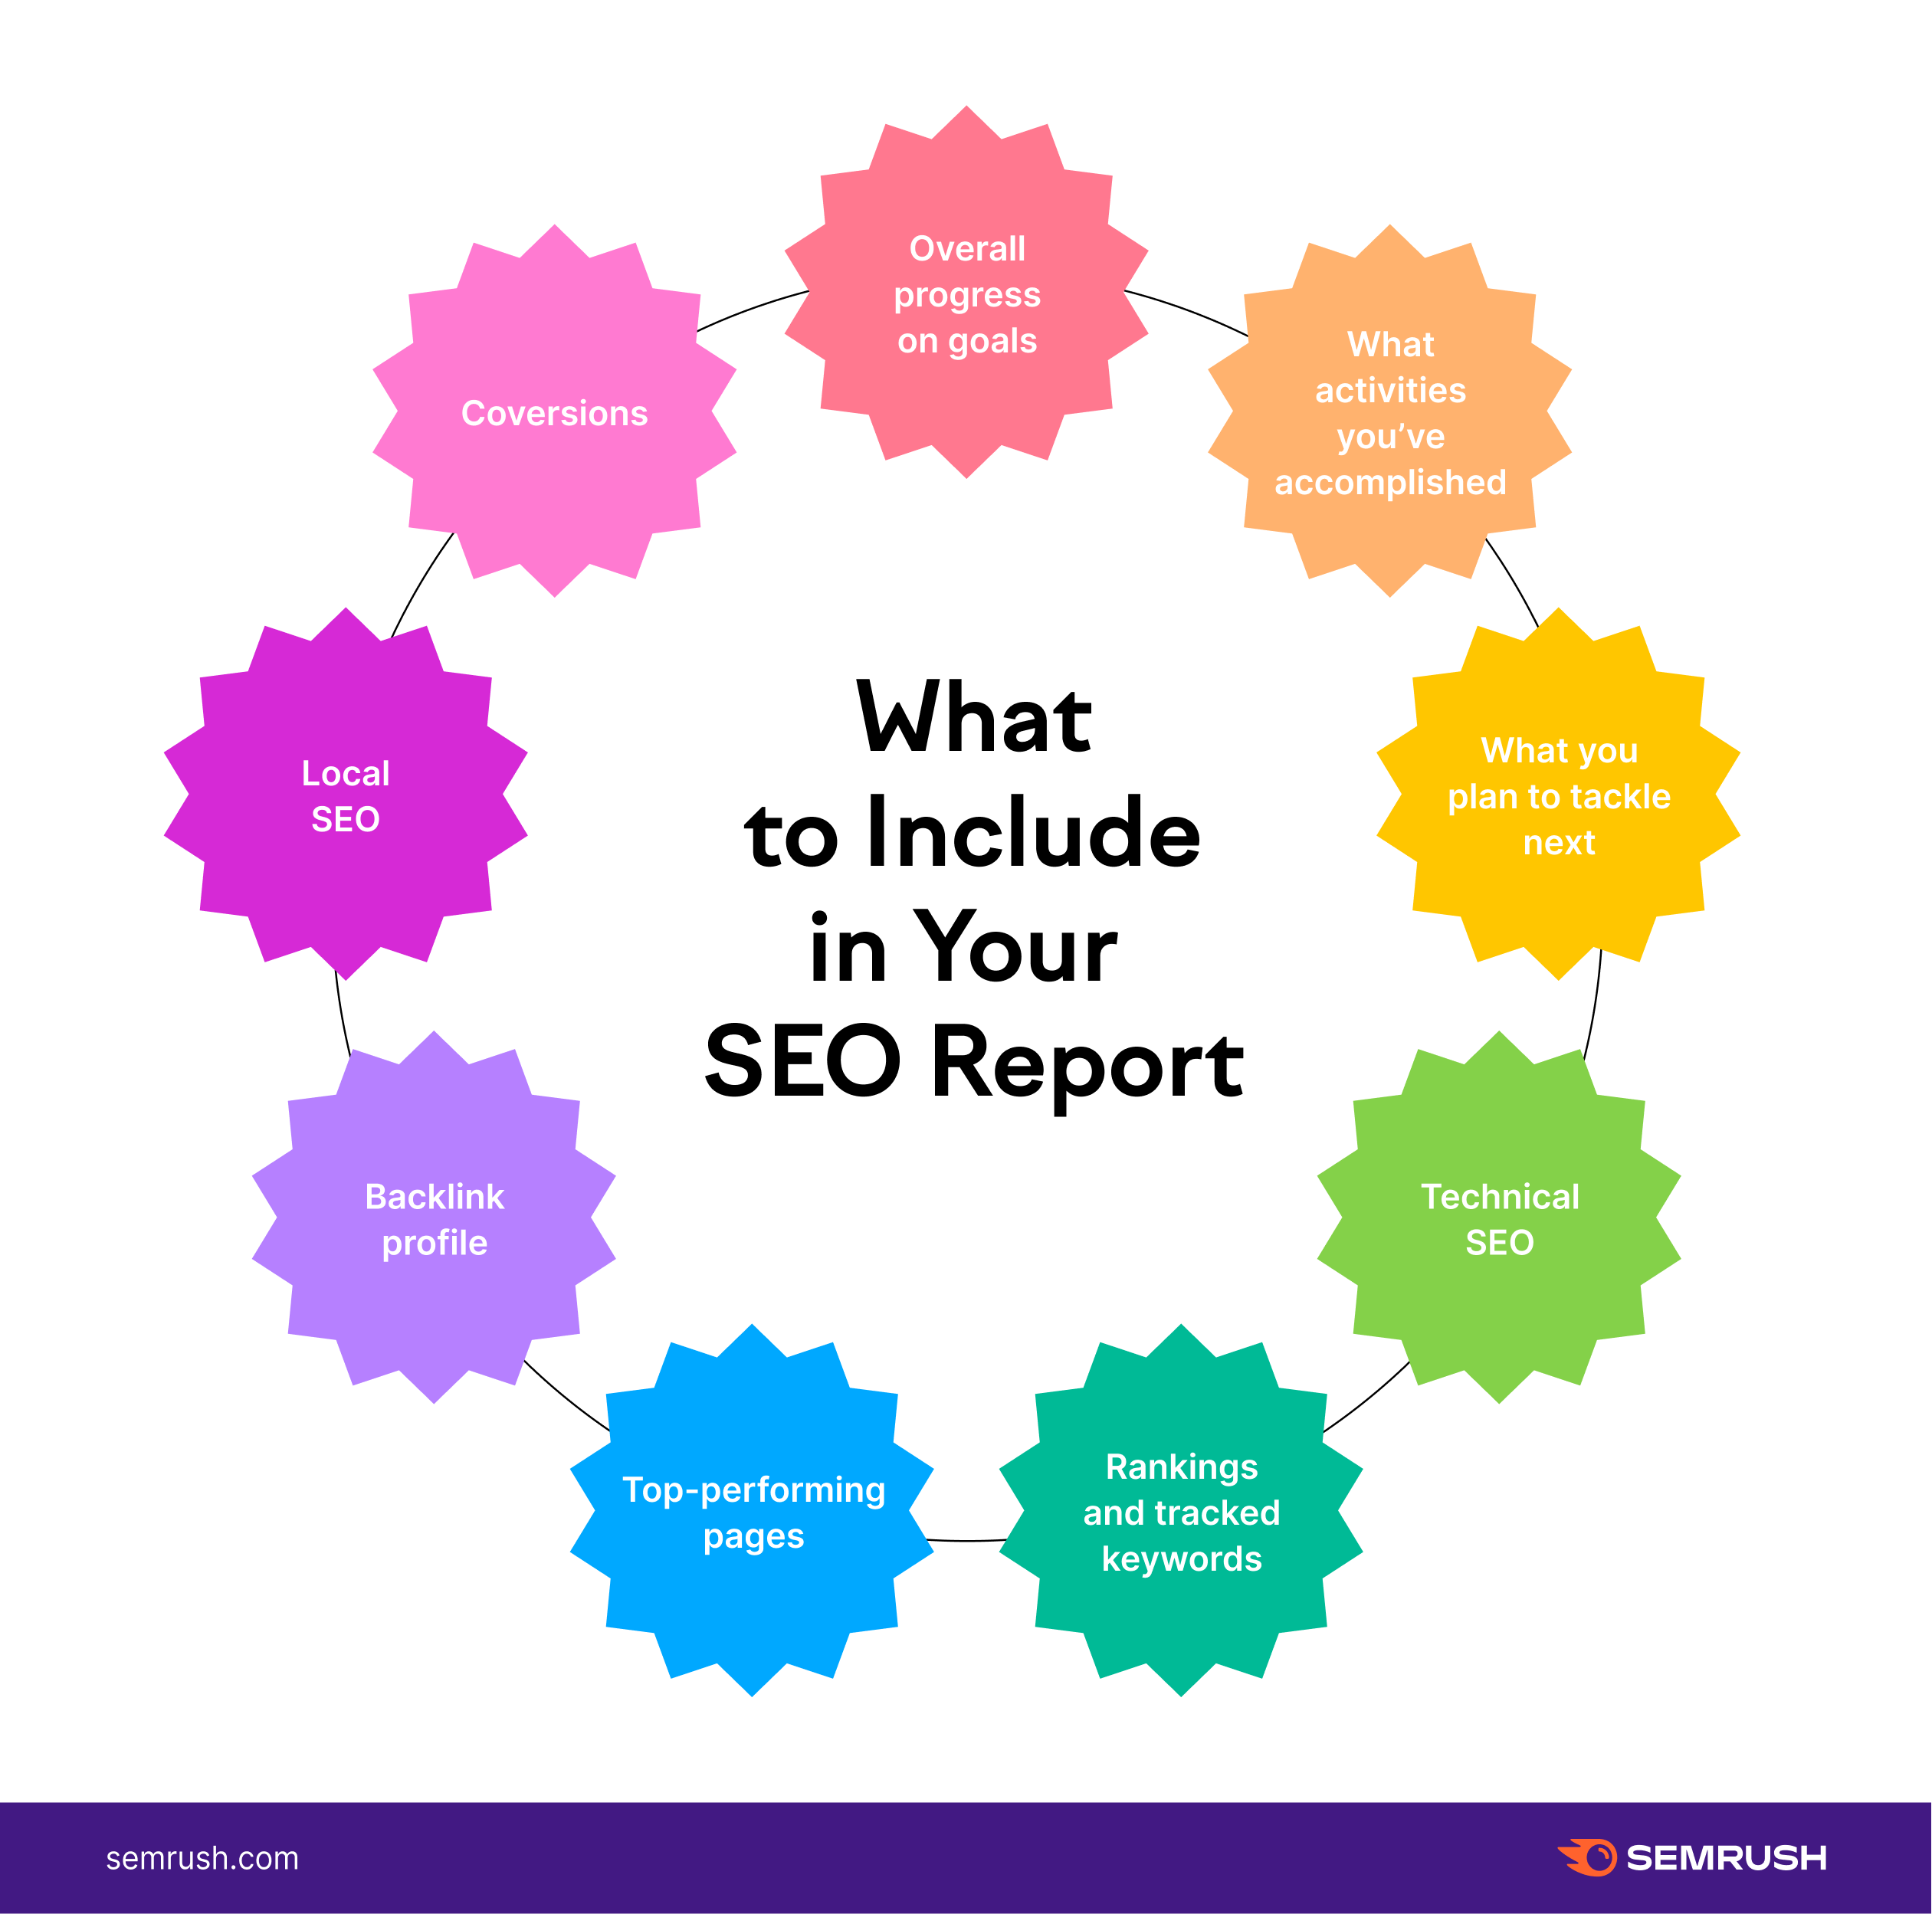 SEO reporting tool: what to include in your SEO report